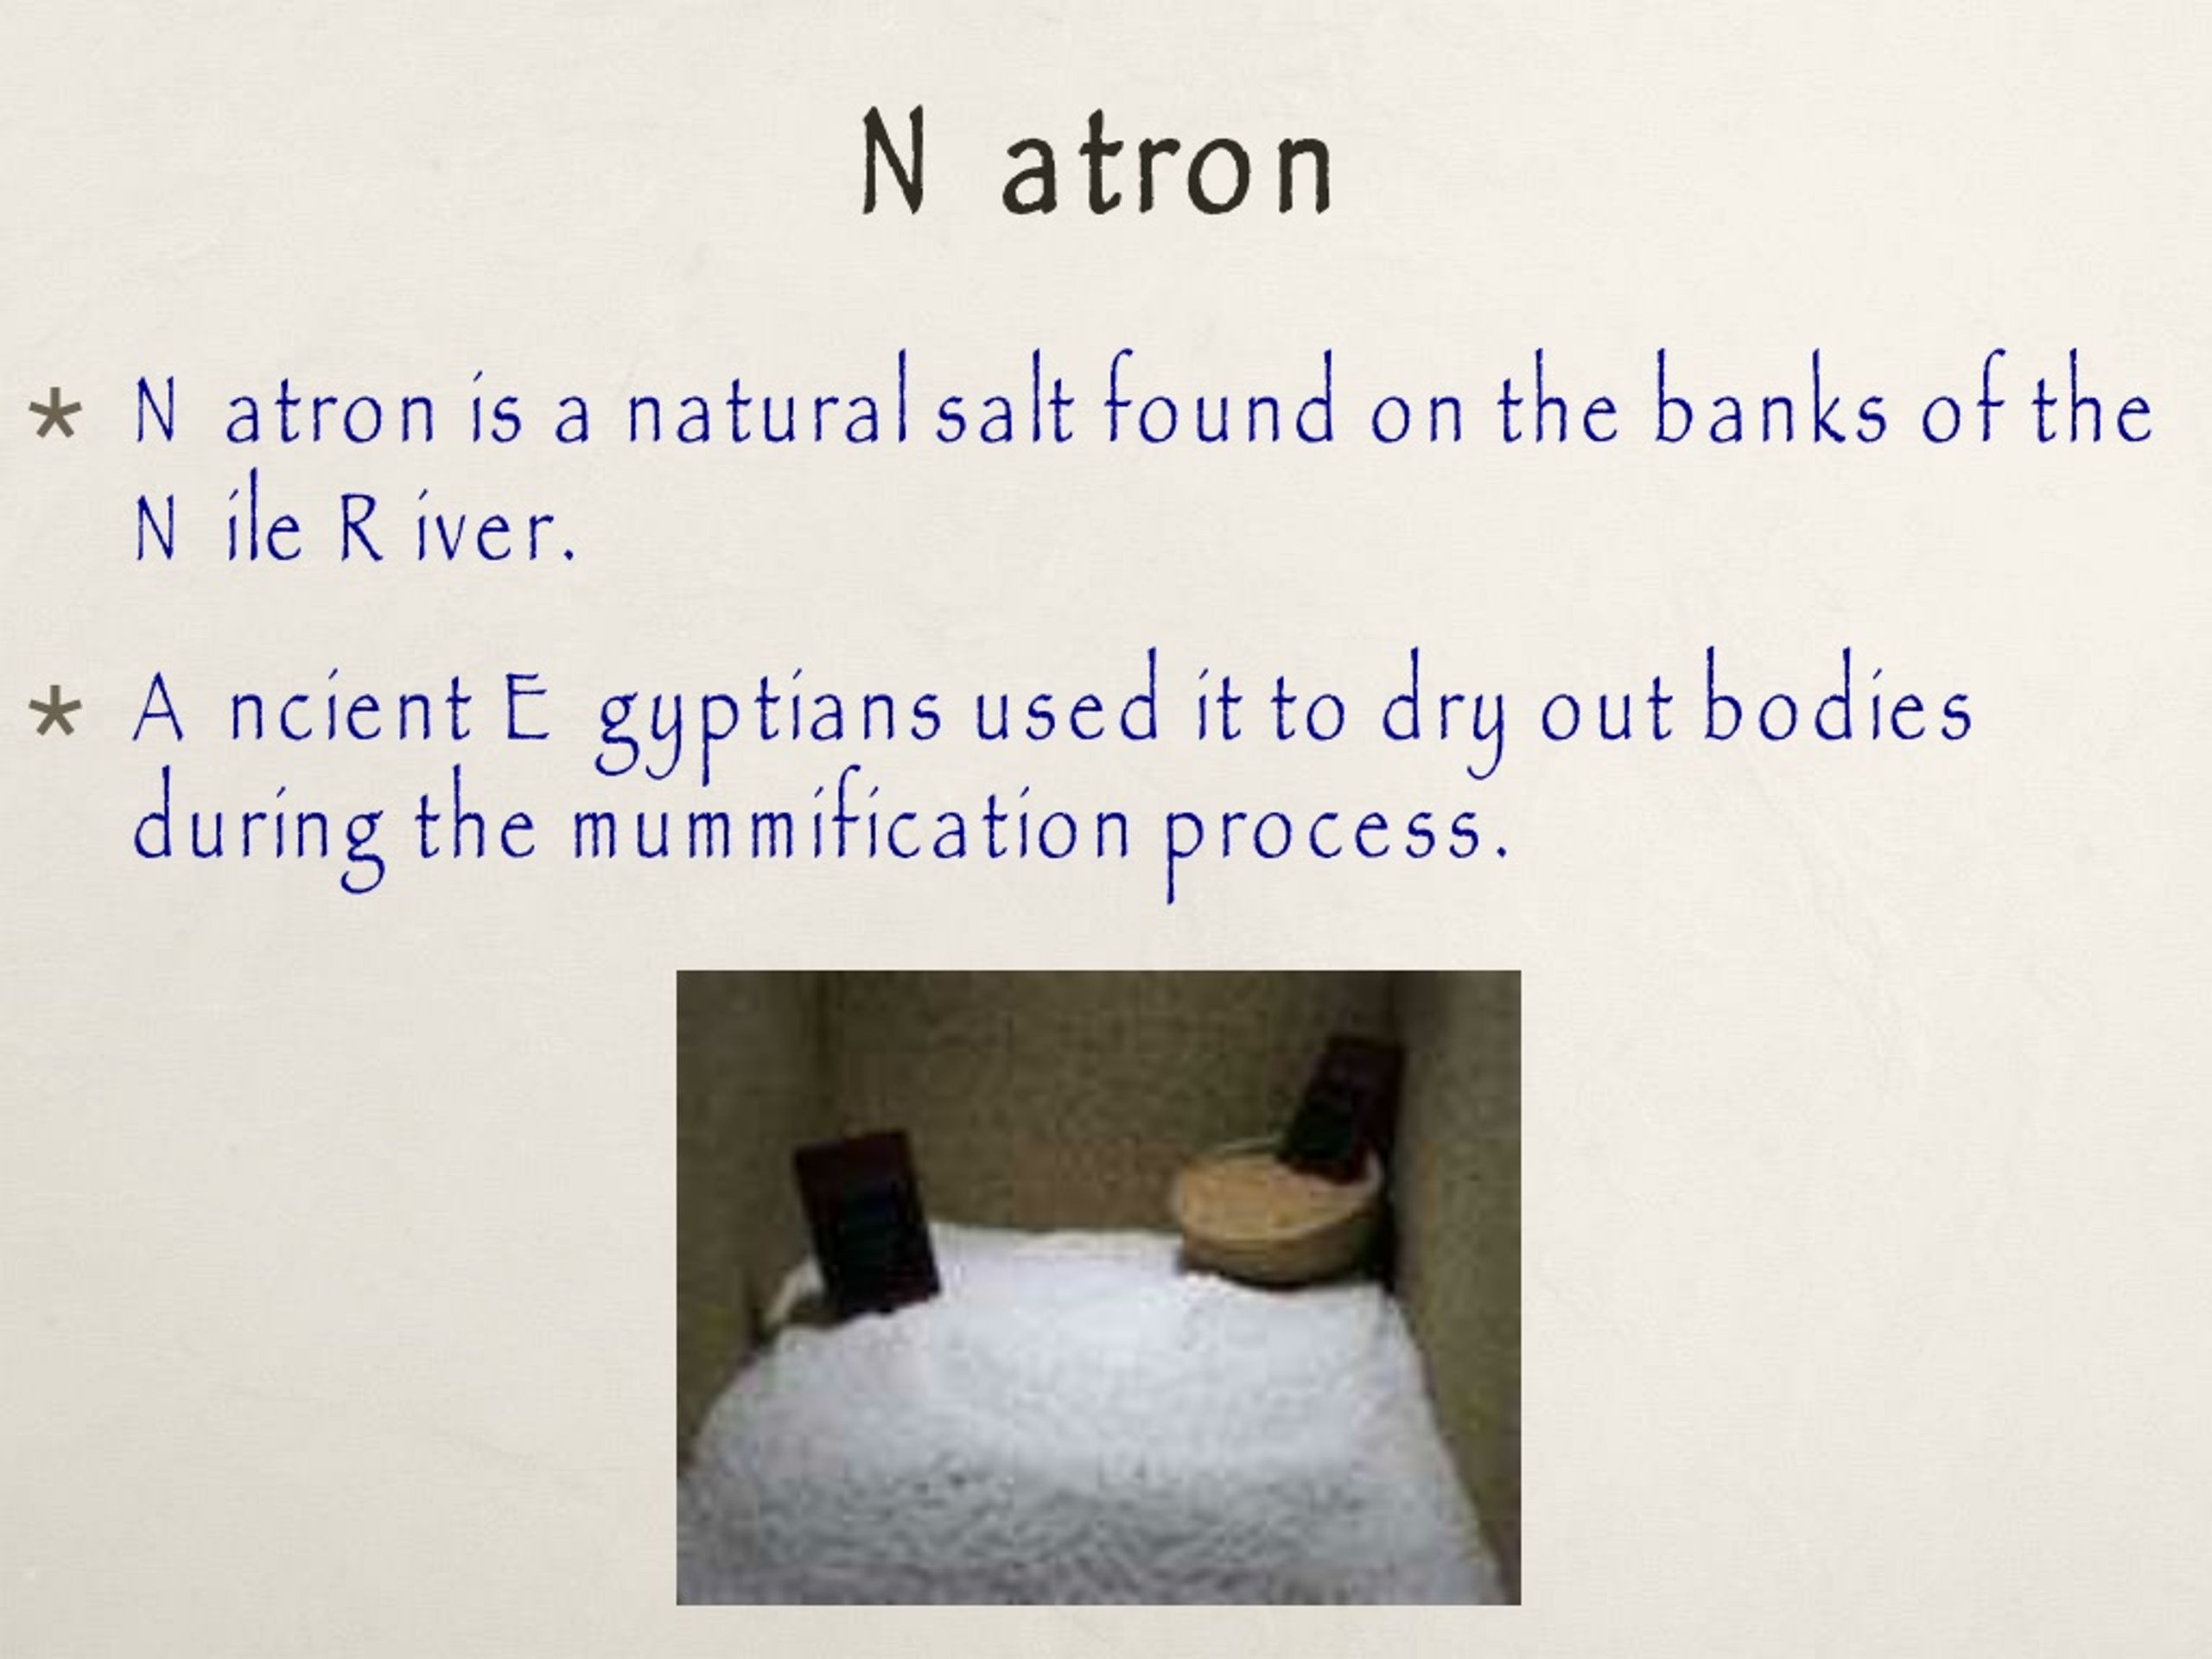 what was the purpose of natron in the mummification process